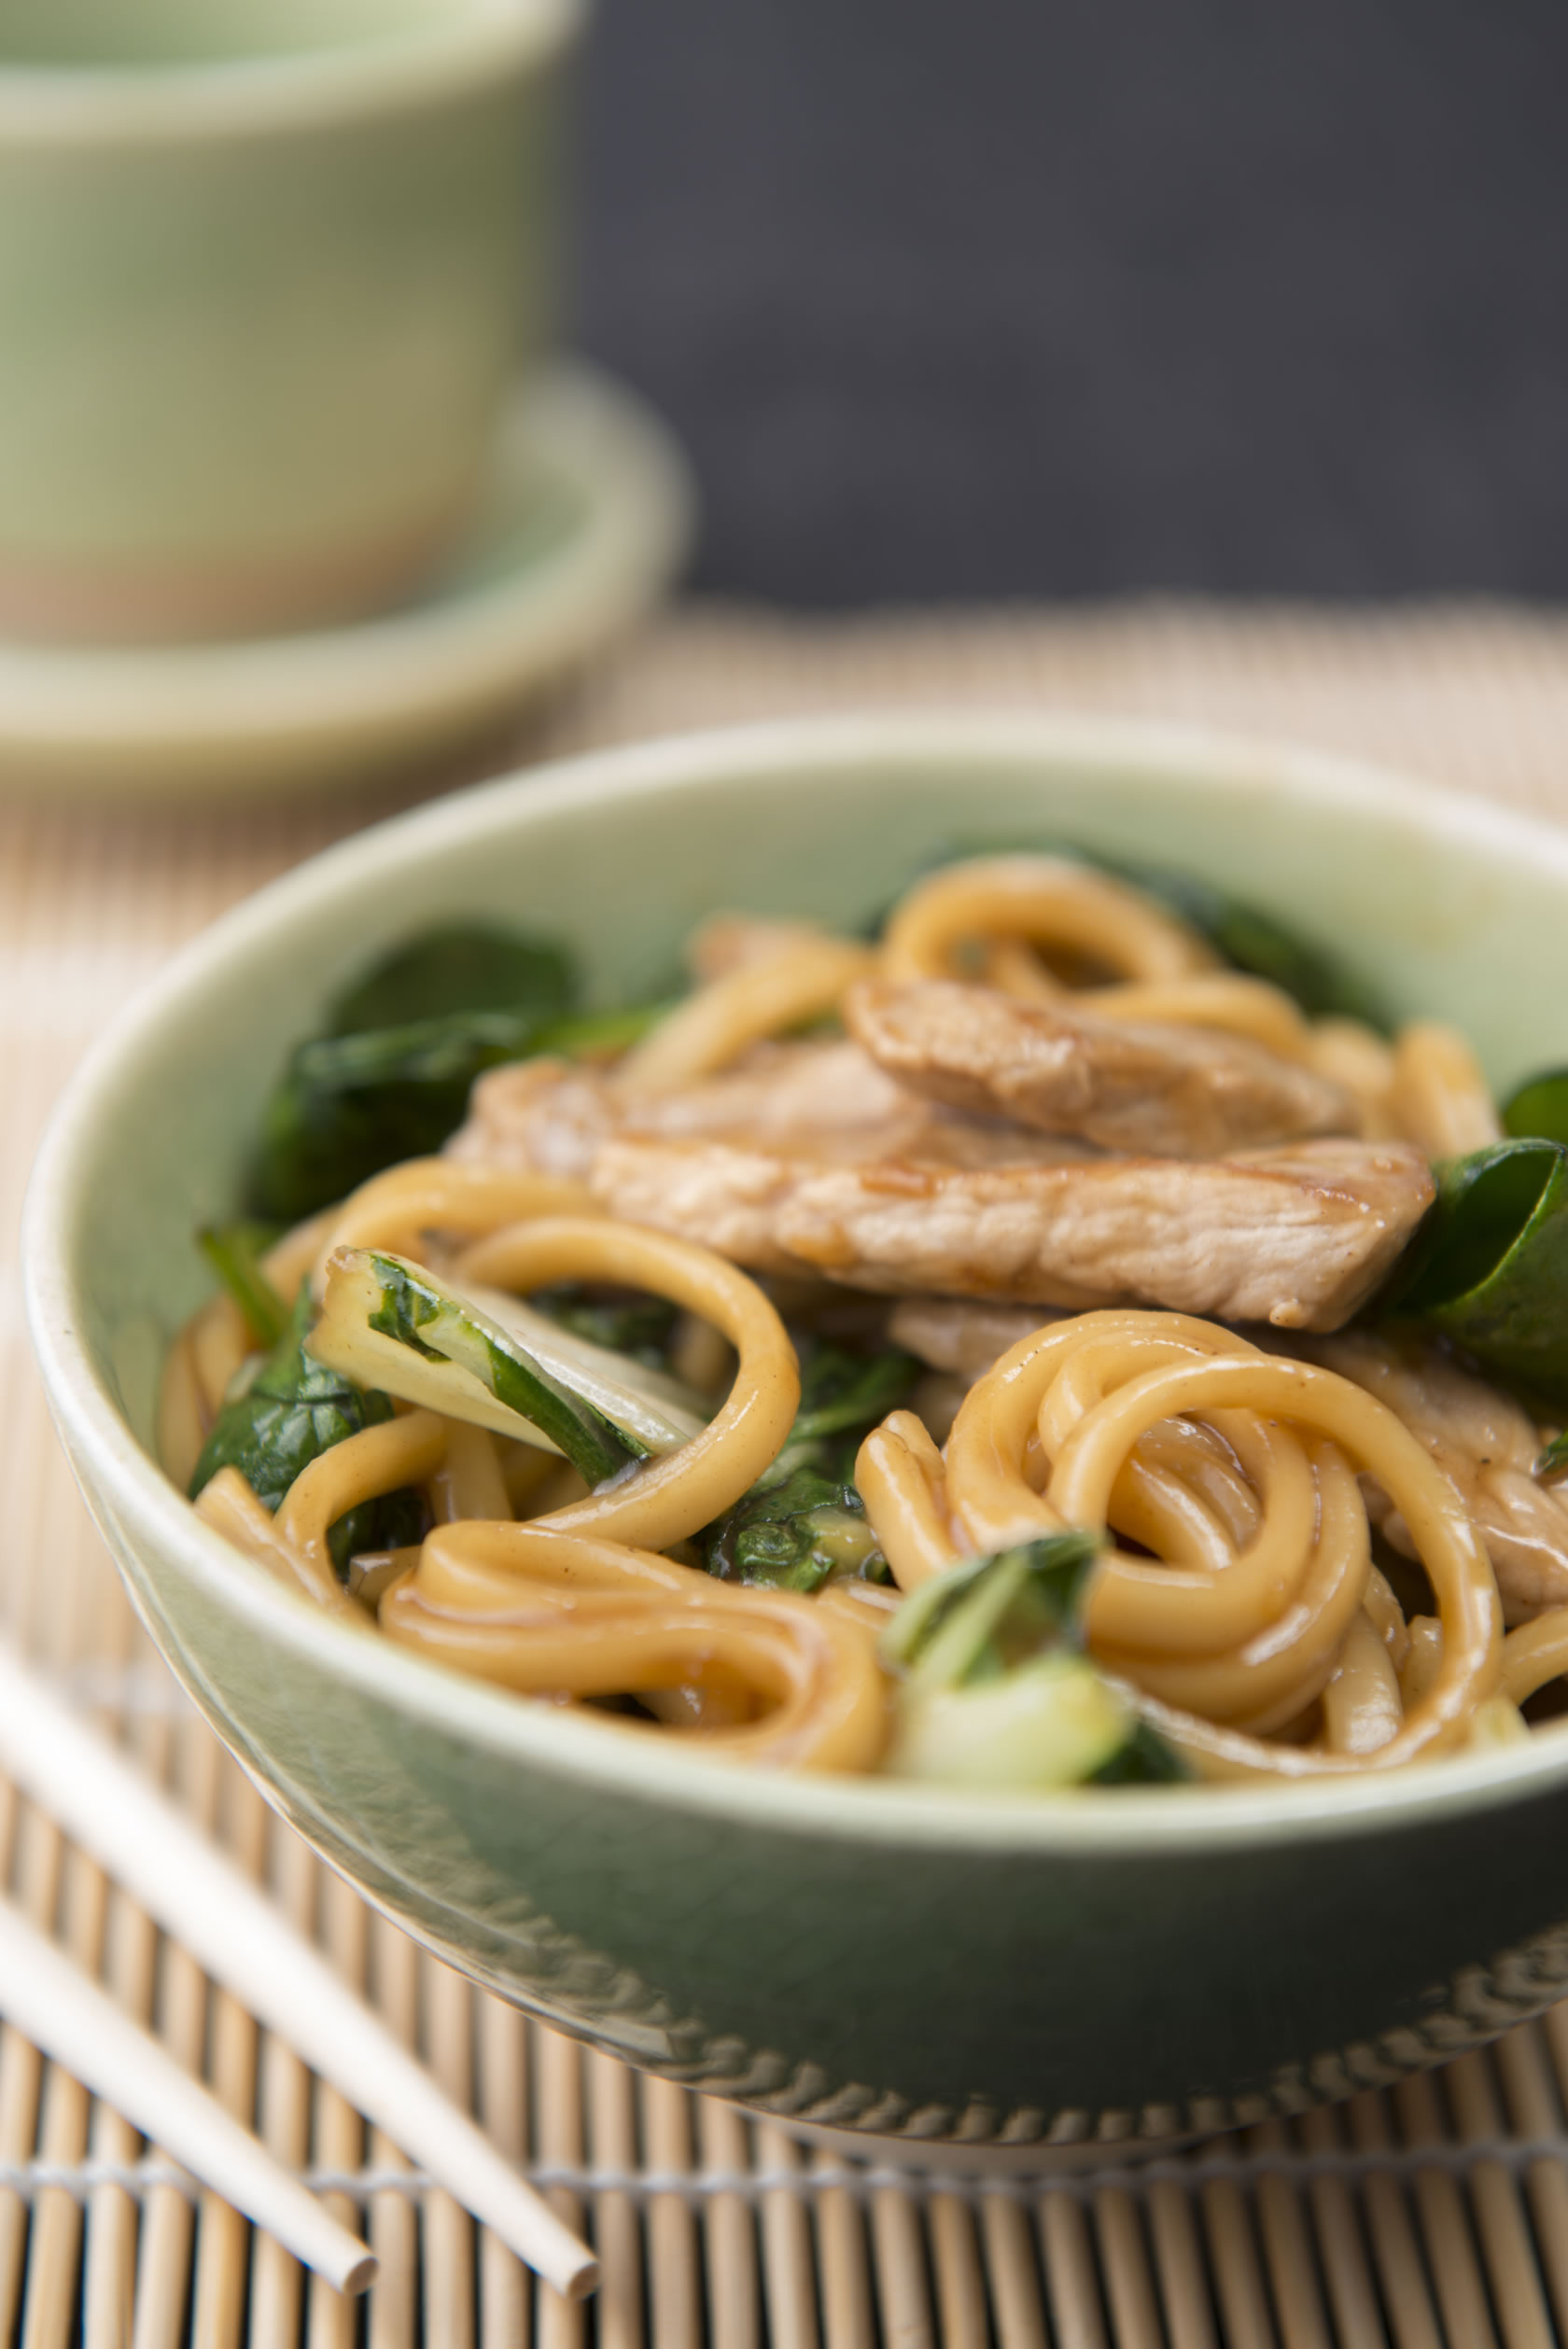 Pork in Star Anise Sauce with Greens and Udon Noodles